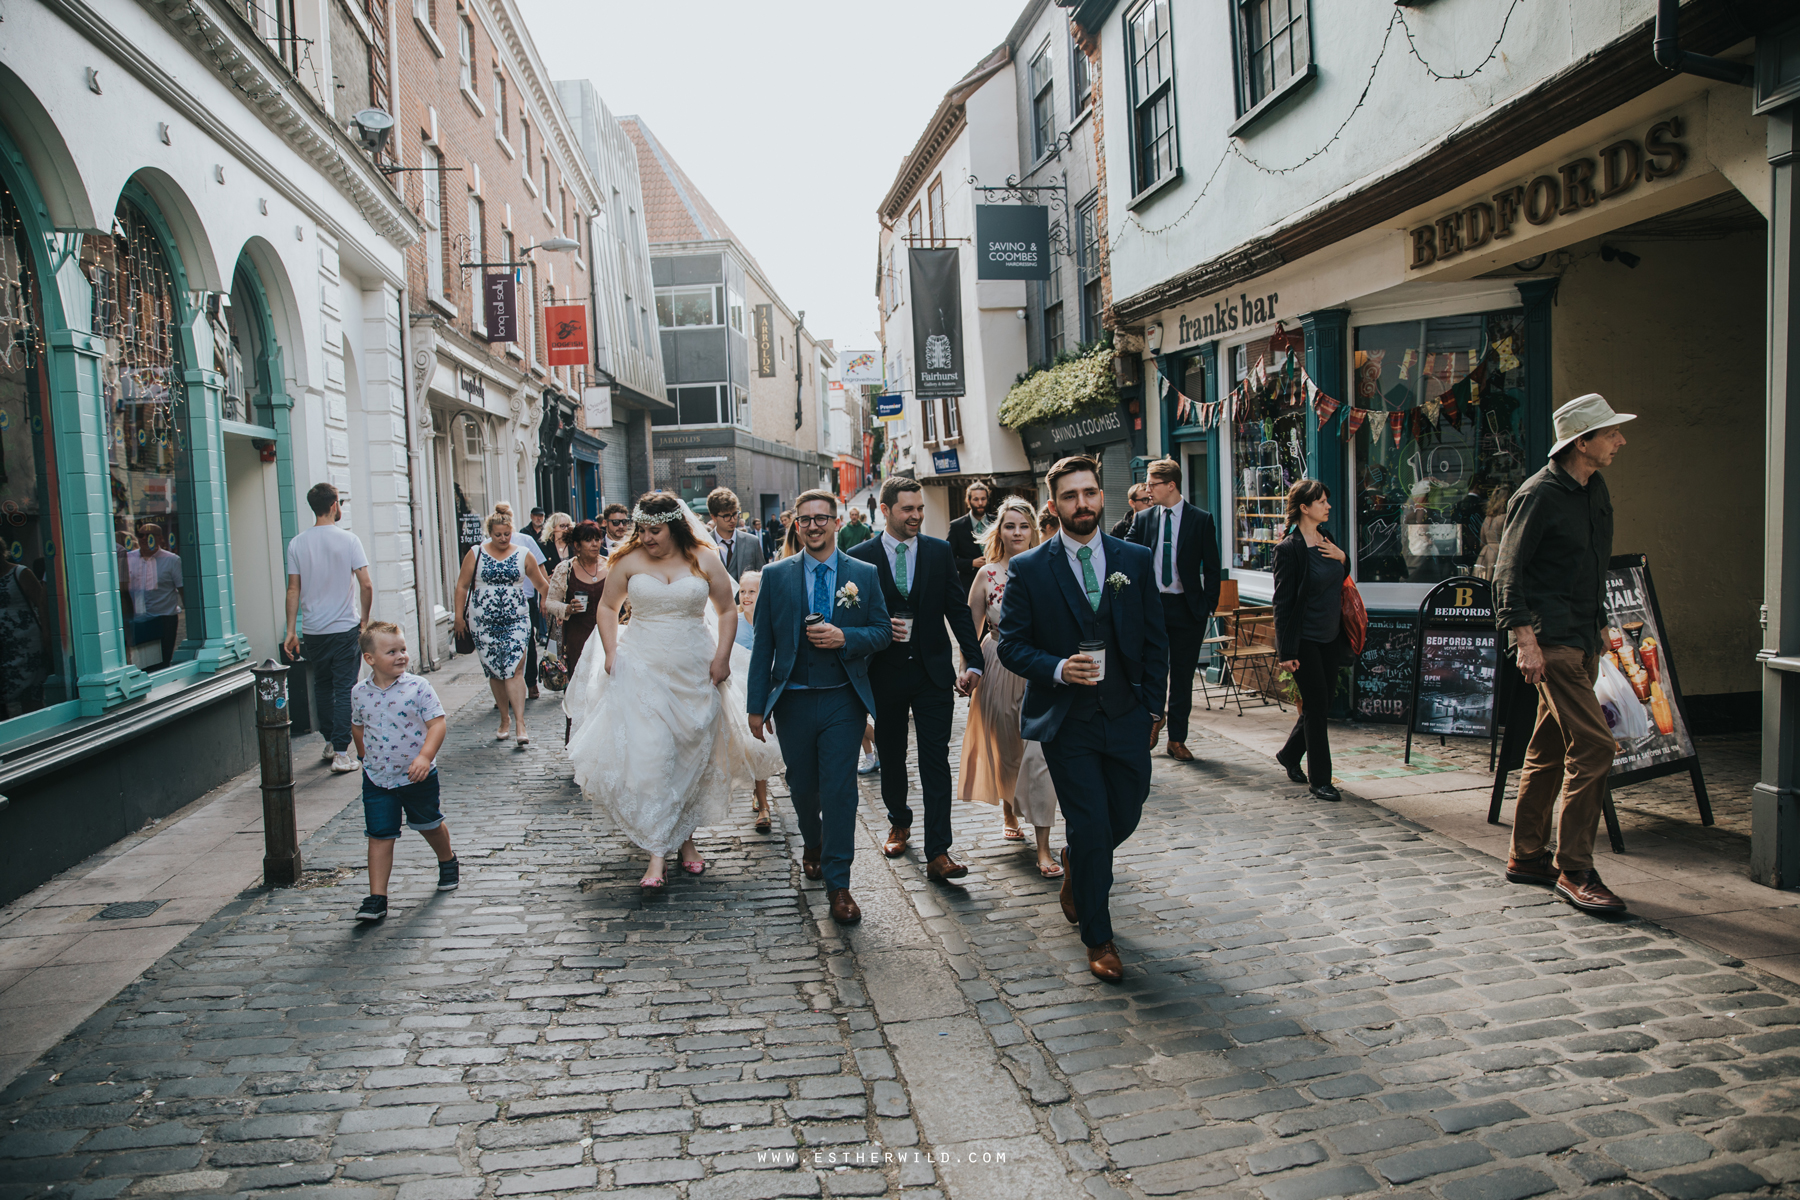 Norwich_Castle_Arcade_Grosvenor_Chip_Birdcage_Cathedral_Cloisters_Refectory_Wedding_Photography_Esther_Wild_Photographer_Norfolk_Kings_Lynn_3R8A1745.jpg